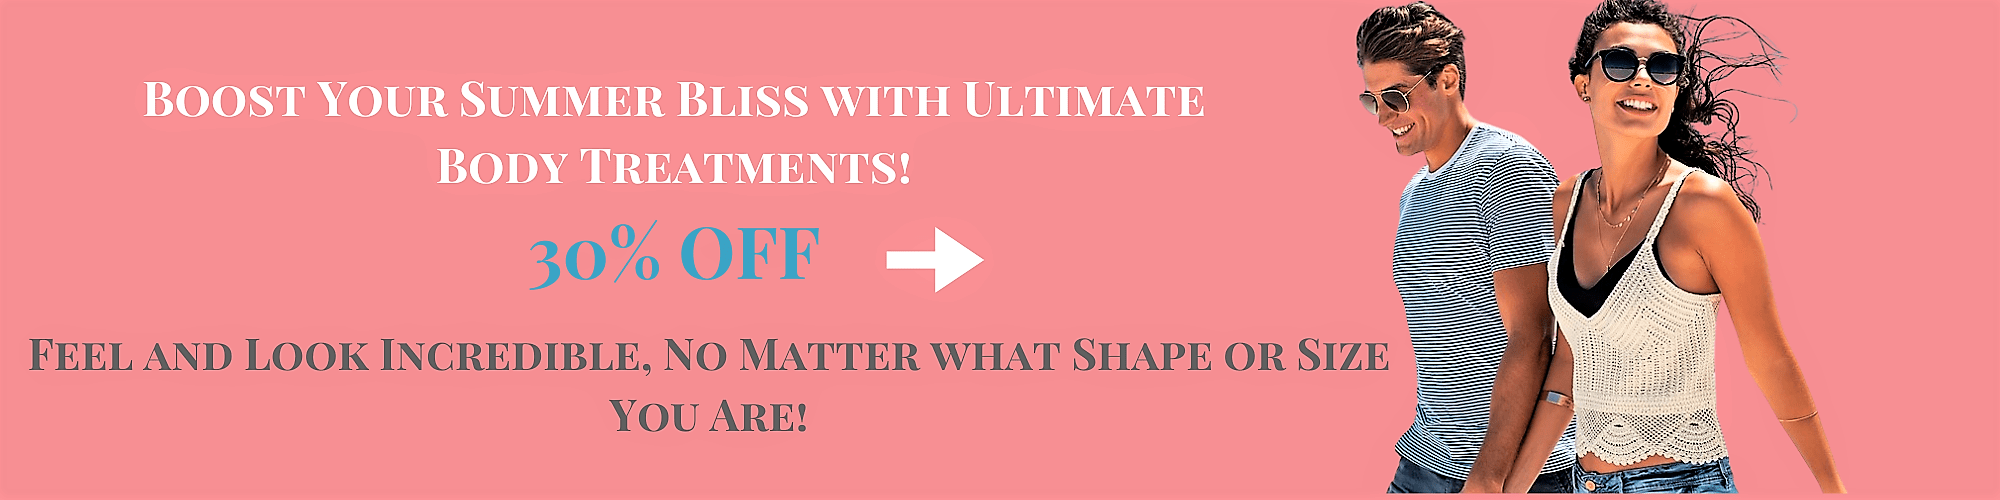 Transform Your Summer with Ultimate Body Treatments! Feel and Look Incredible, No Matter Your Shape or Size! 30% off